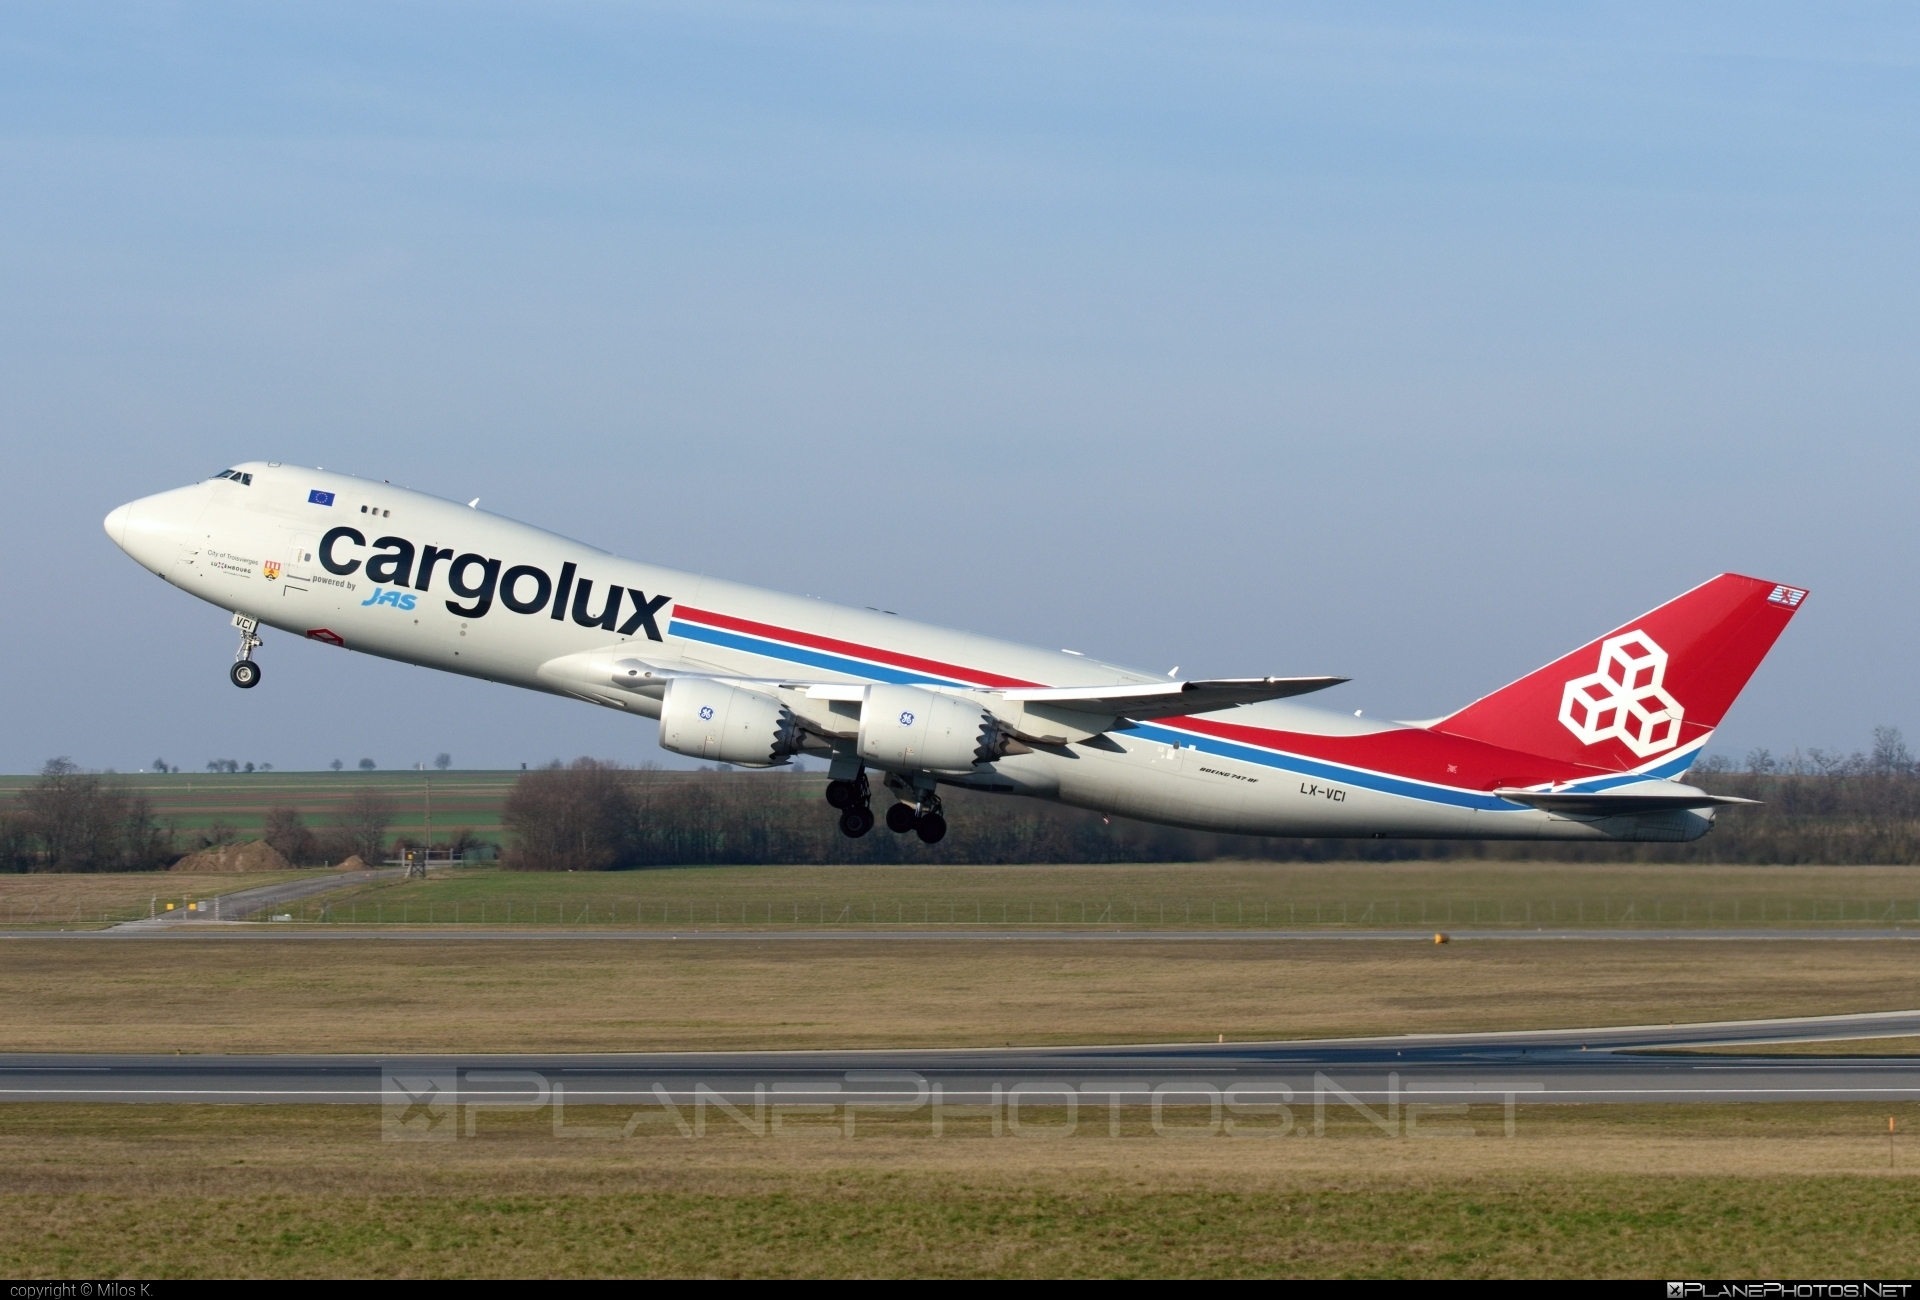 Boeing 747-8F - LX-VCI operated by Cargolux Airlines International #b747 #b747f #b747freighter #boeing #boeing747 #cargolux #jumbo